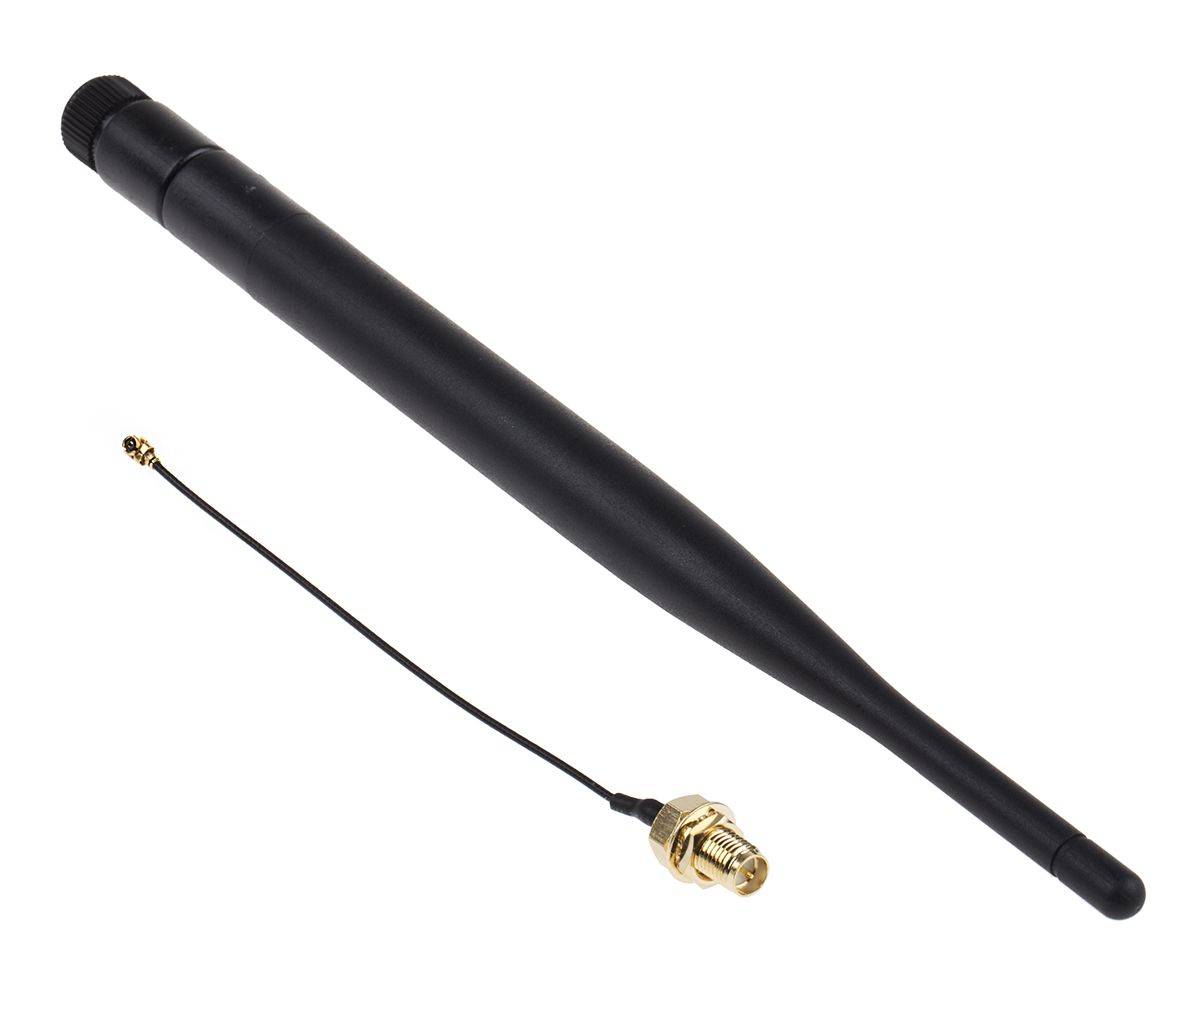 Pycom Universal Antenna Kit for use with FiPy, LoPy, SiPy